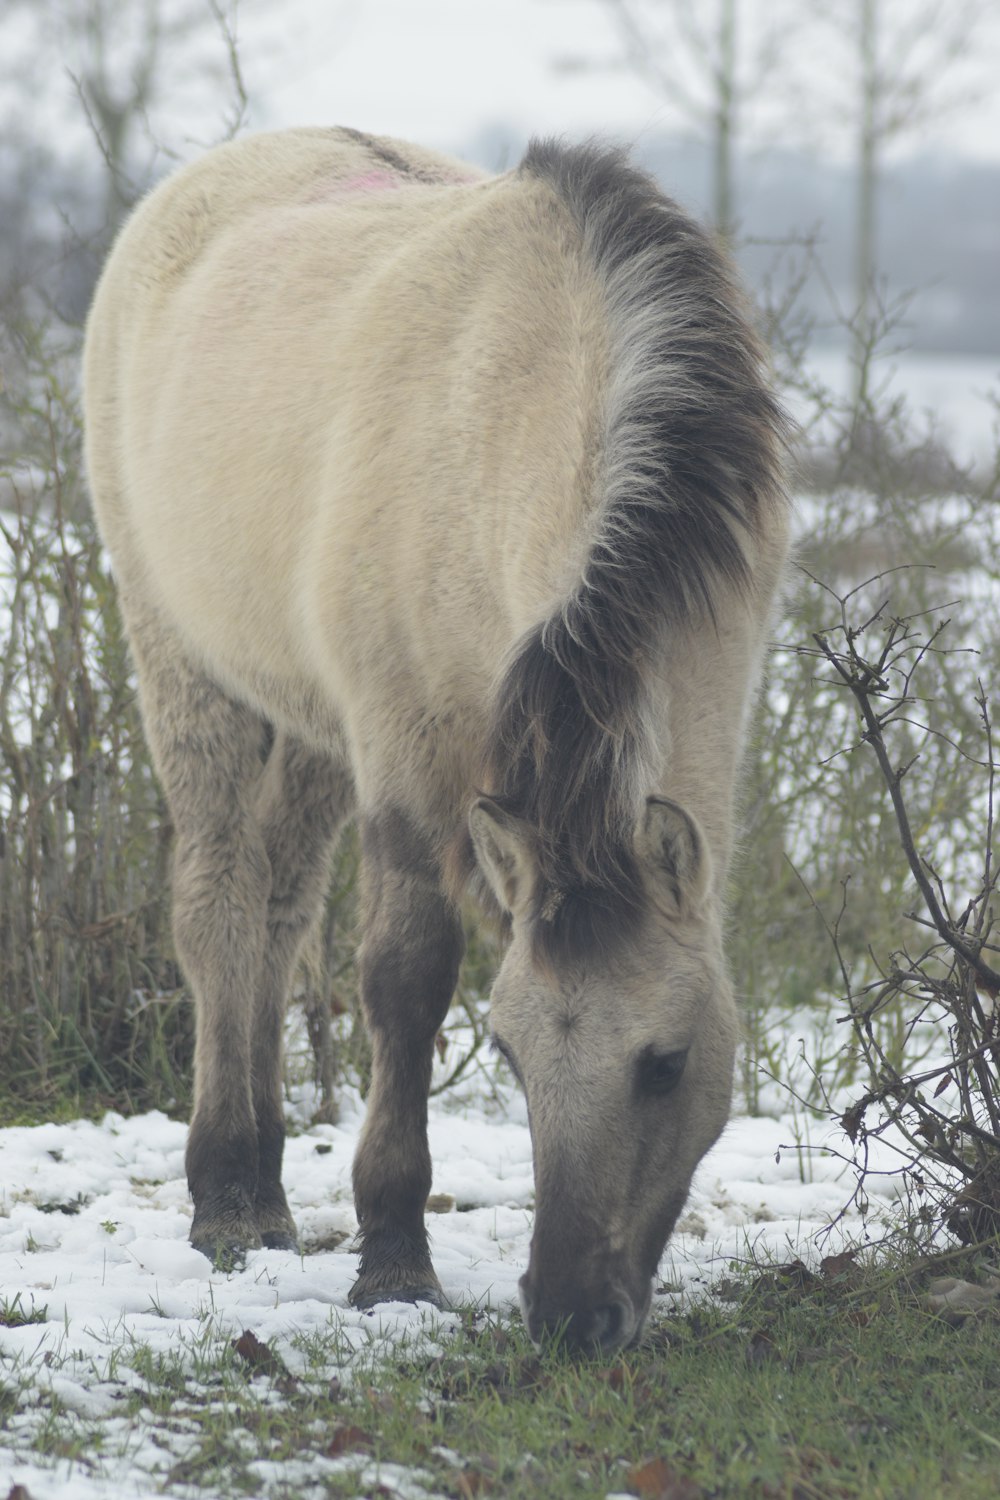 a white horse eating grass in a snowy field